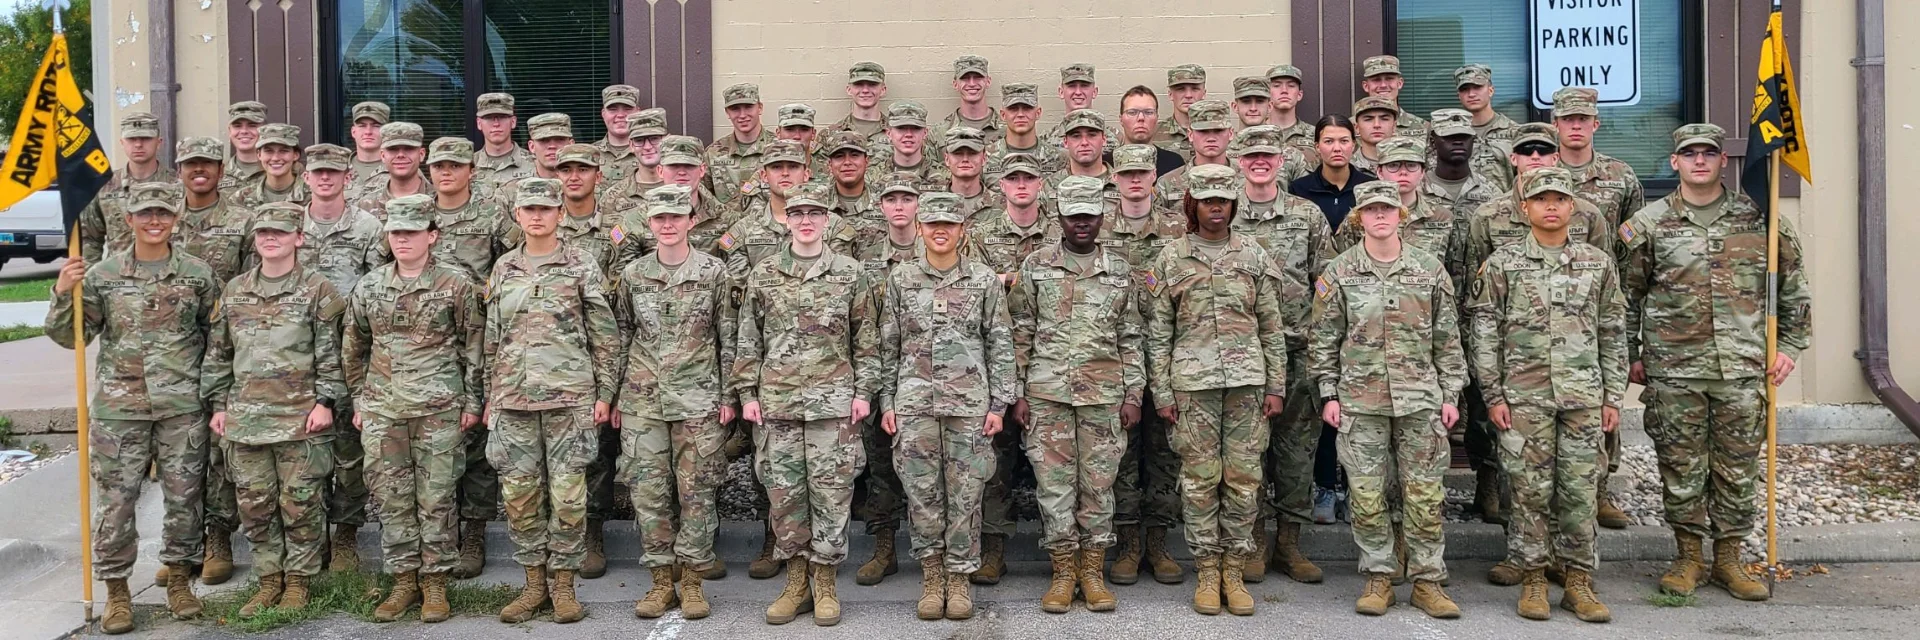 ROTC troops smiling for picture